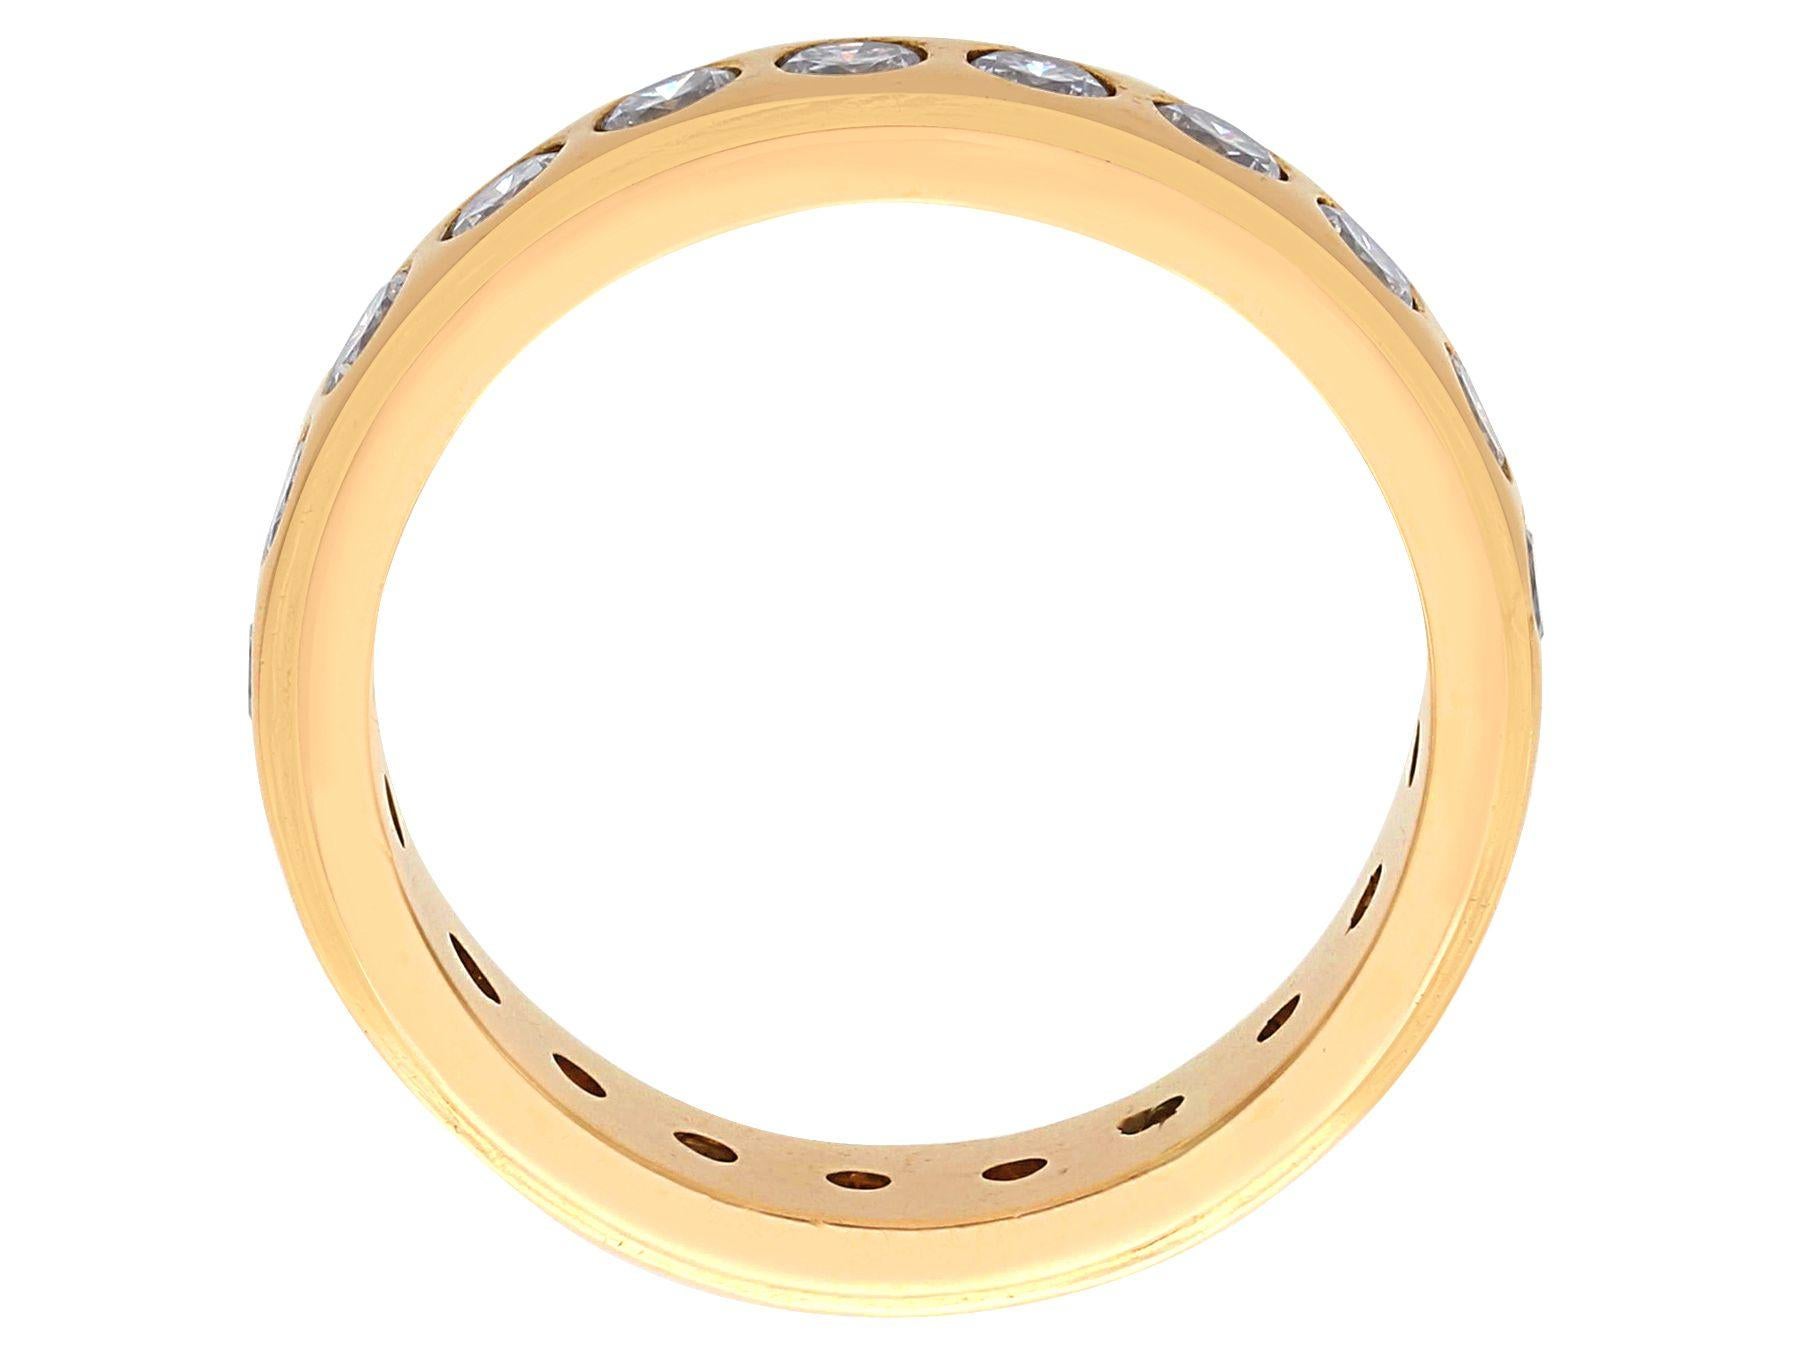 Vintage 1.76 carat Diamond and Yellow Gold Full Eternity Ring, circa 1960 In Excellent Condition For Sale In Jesmond, Newcastle Upon Tyne